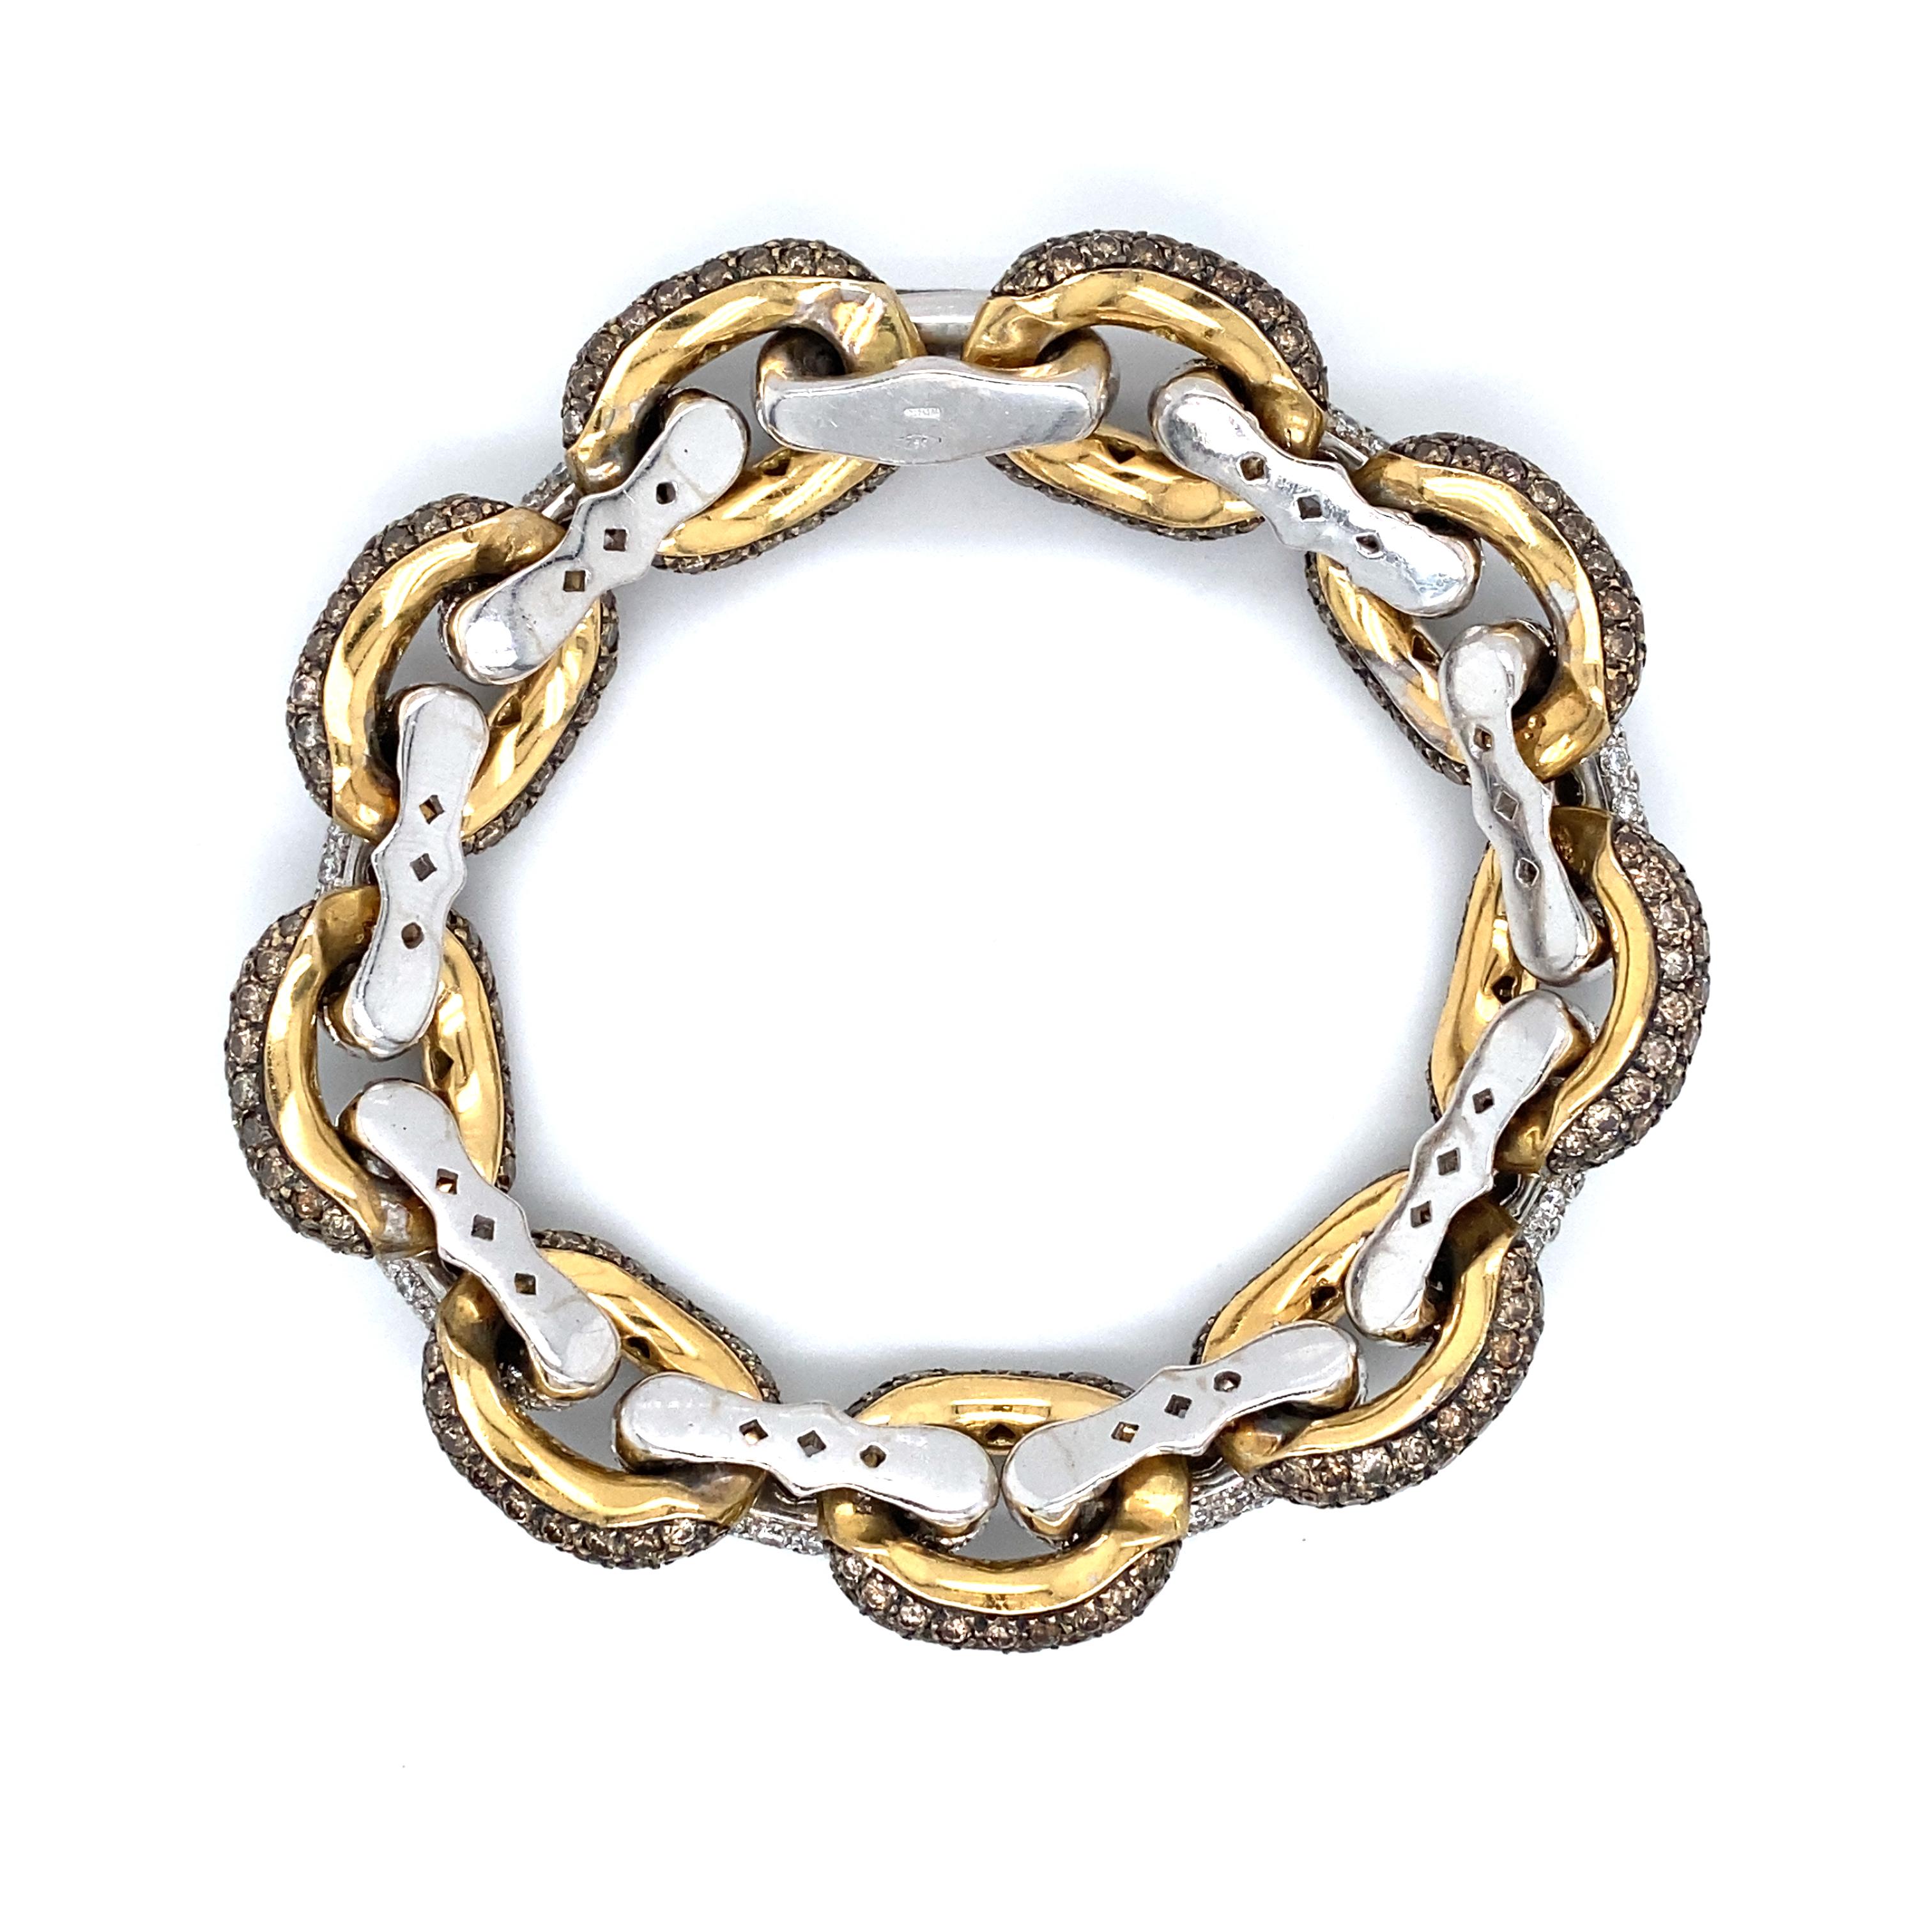 10.0 CTW White and Fancy Brown Diamond Chain Bracelet in 14 Karat Gold For Sale 2